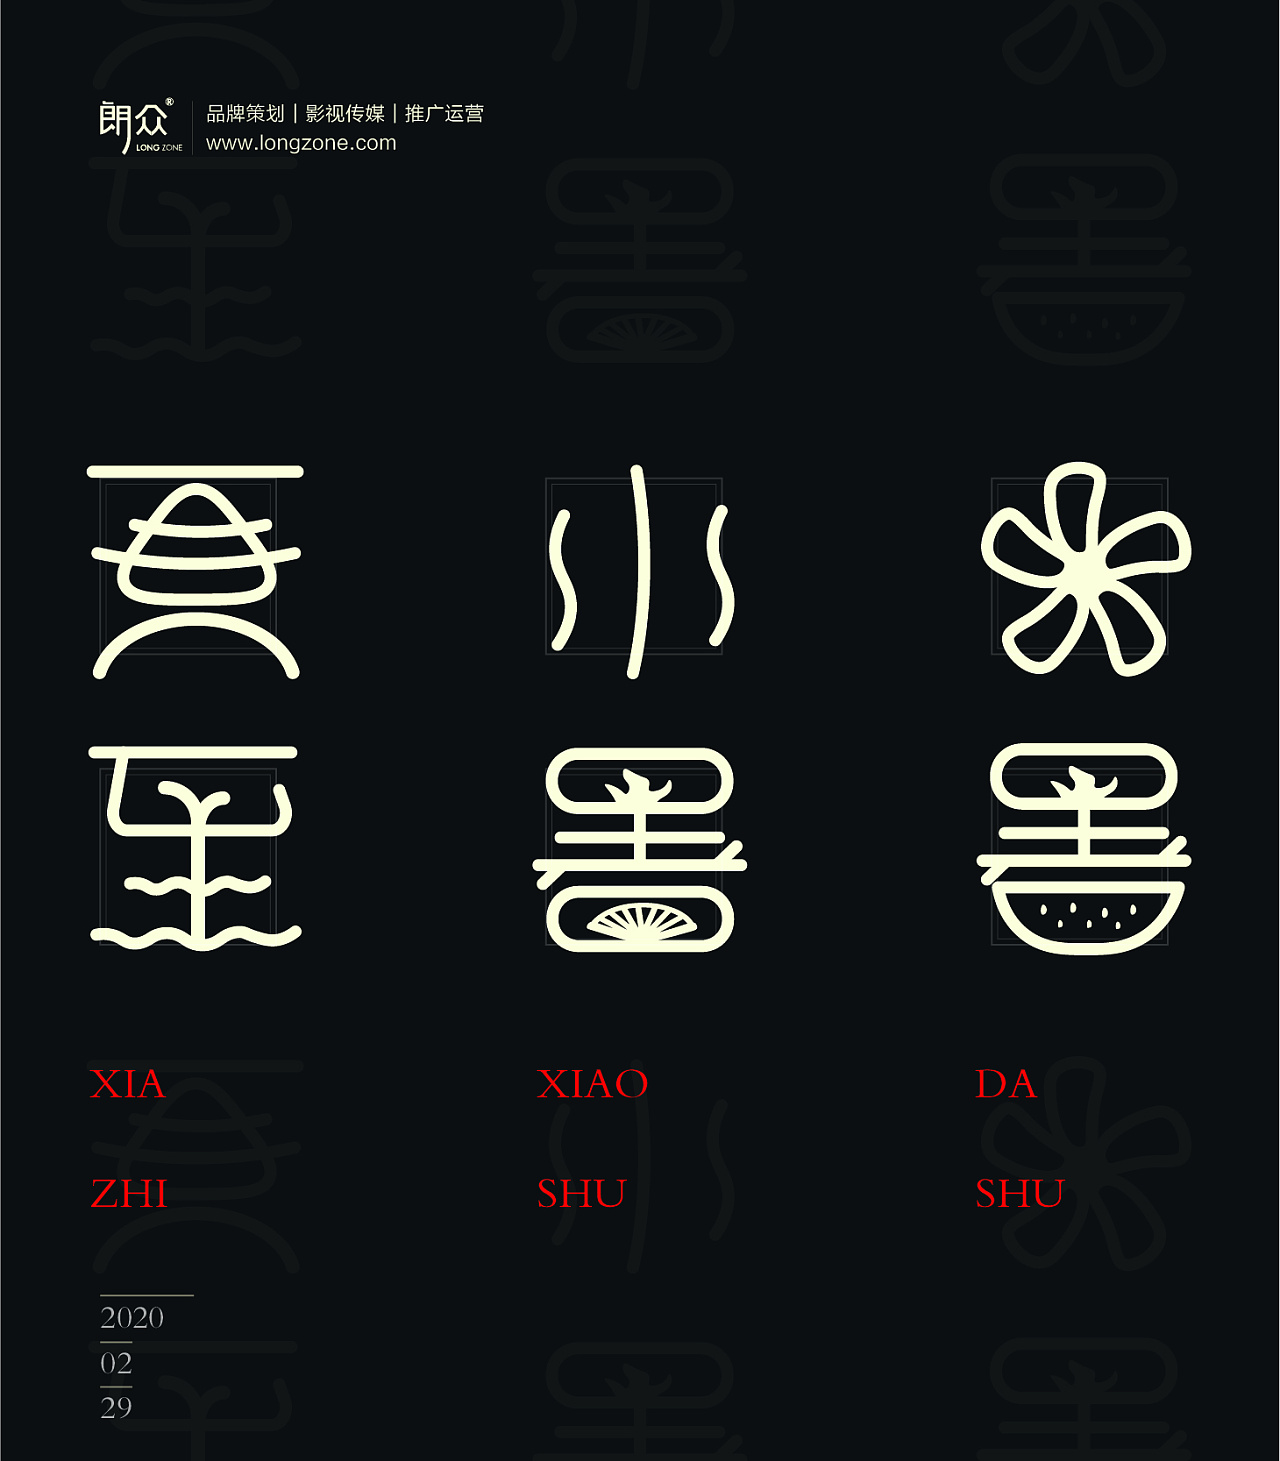 Chinese Creative Font Design-How will food collide with traditional solar terms by integrating food into design?